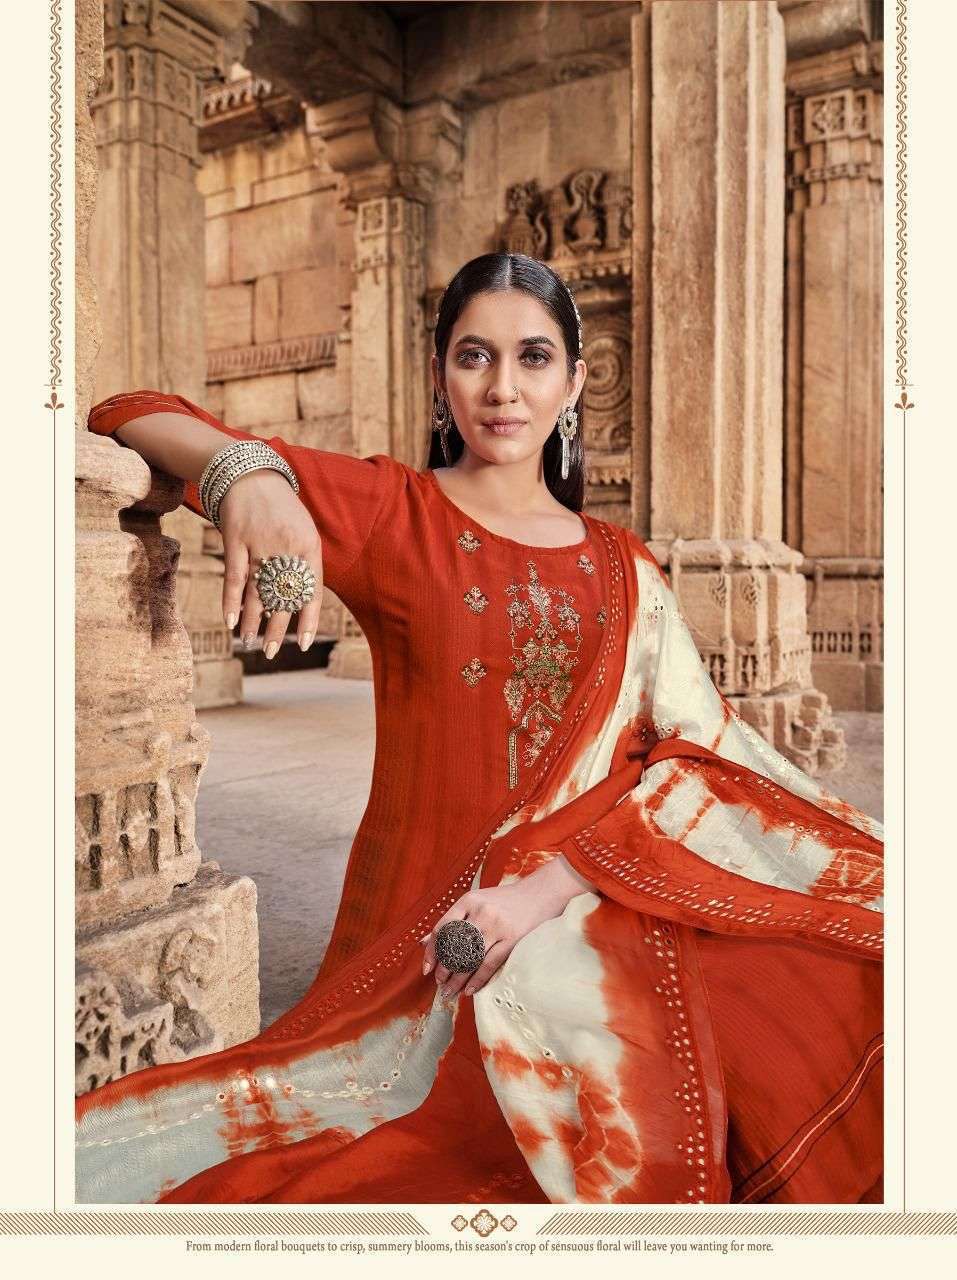 MITTOO PRESENTS LIFESTYLE RAYON WITH FANCY WORK WHOLESALE READYMADE COLLECTION